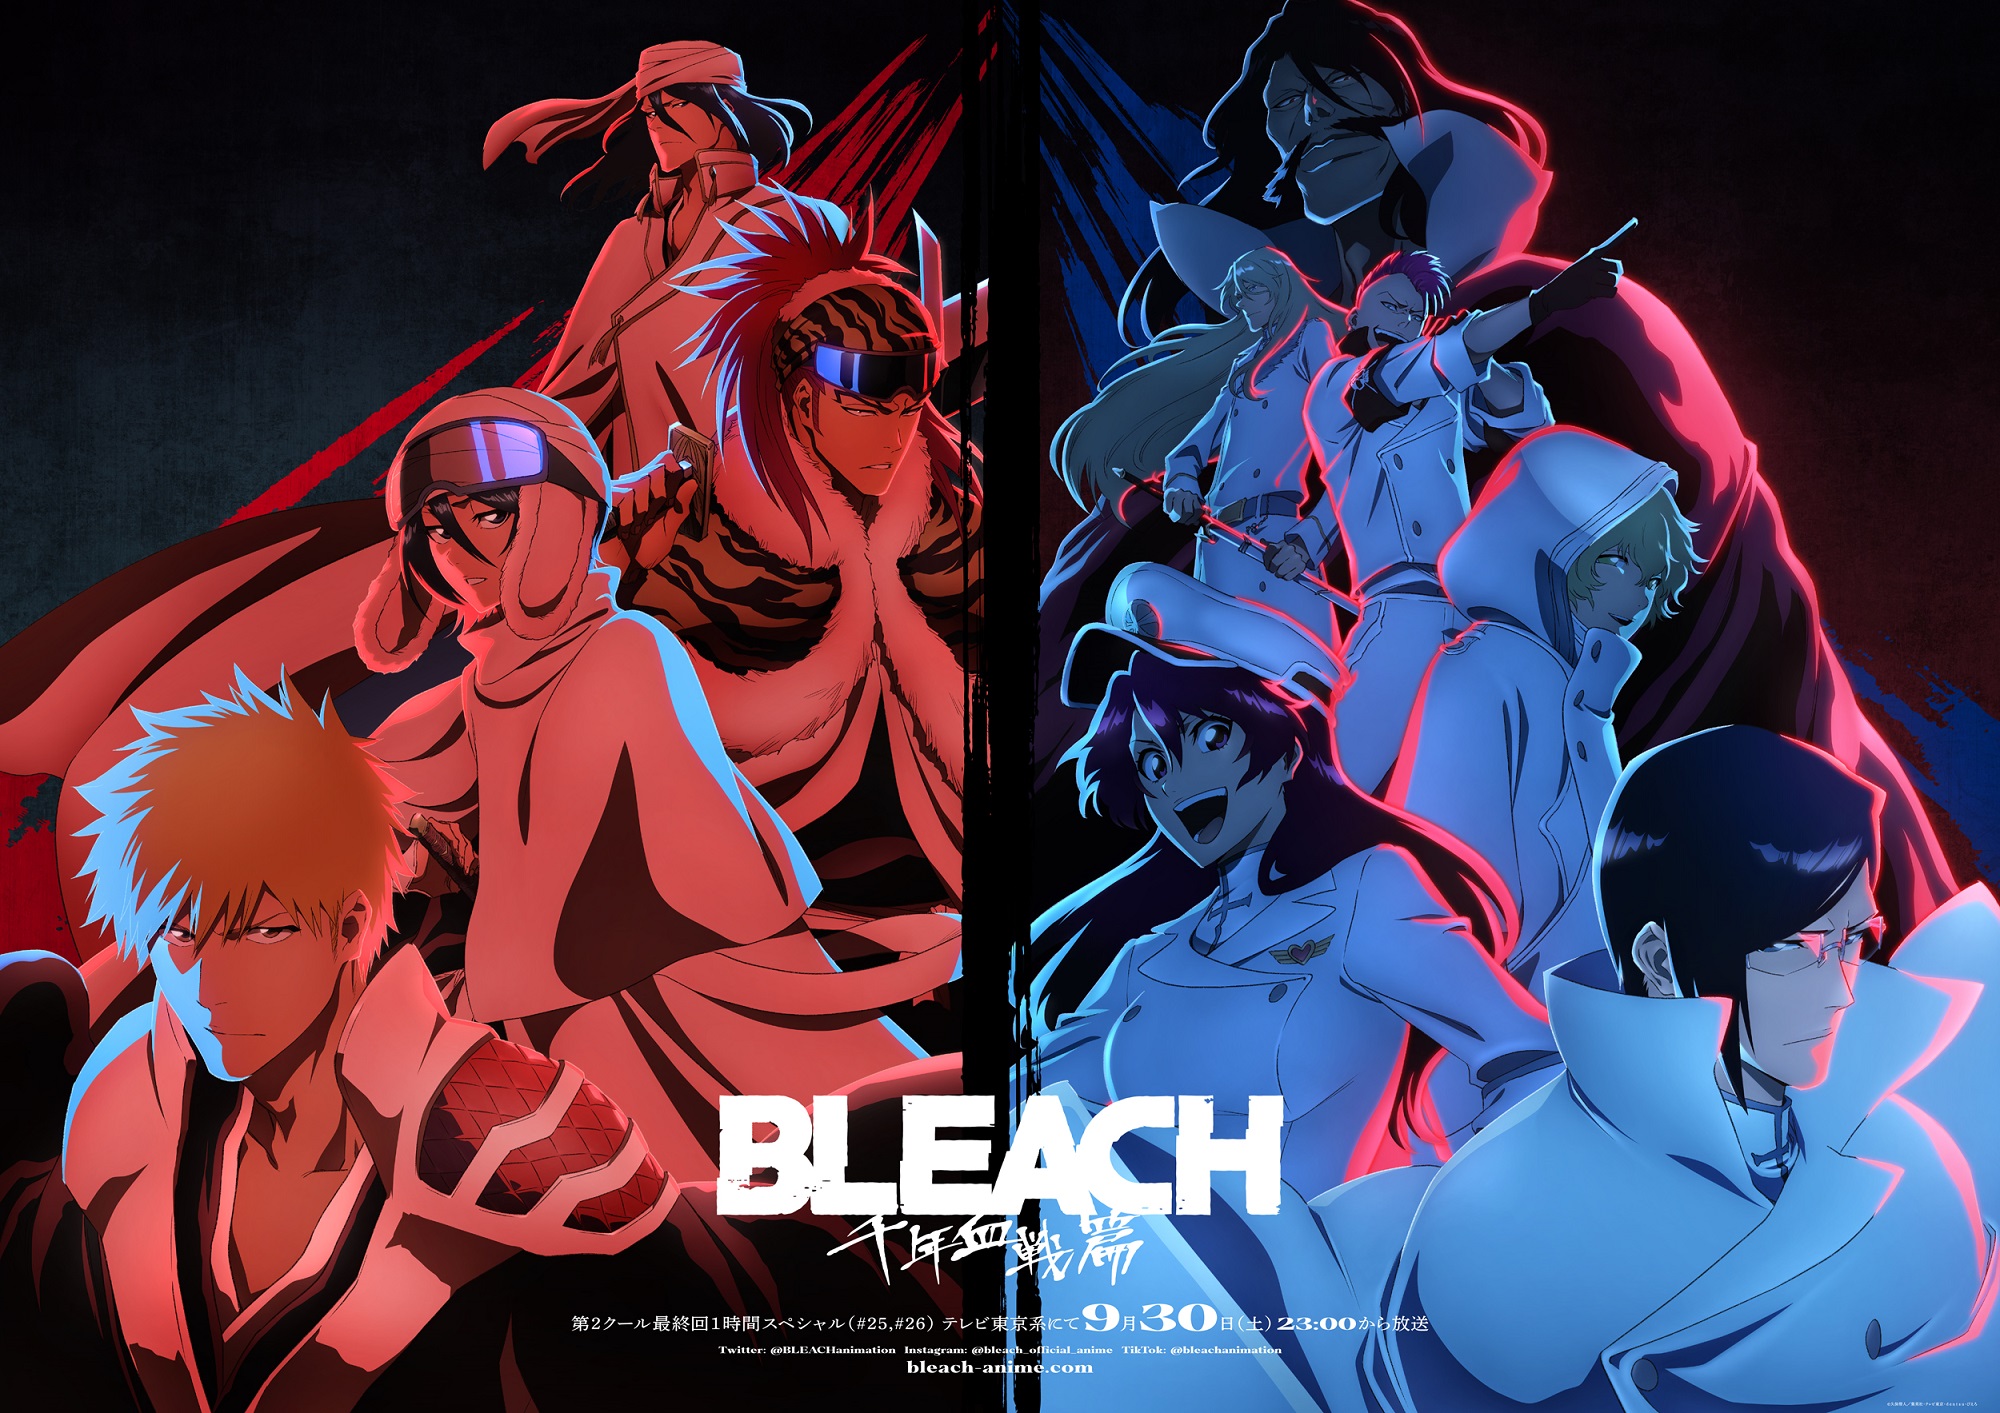 All Bleach Episodes Removed From Crunchyroll - Disney Got The